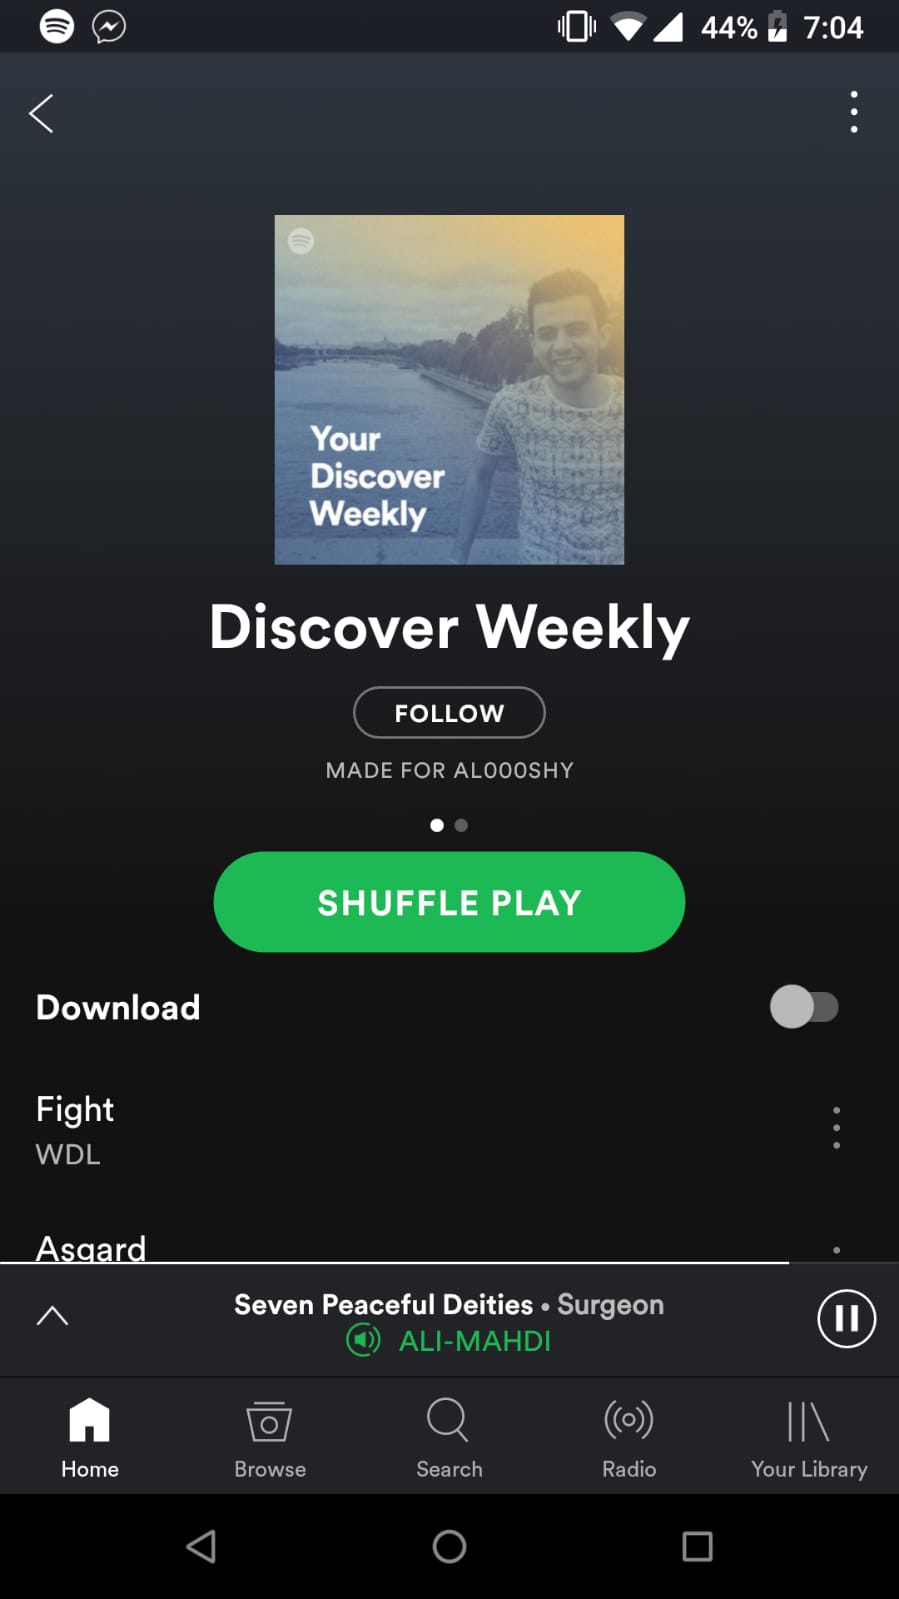 Spotify Discover Weekly